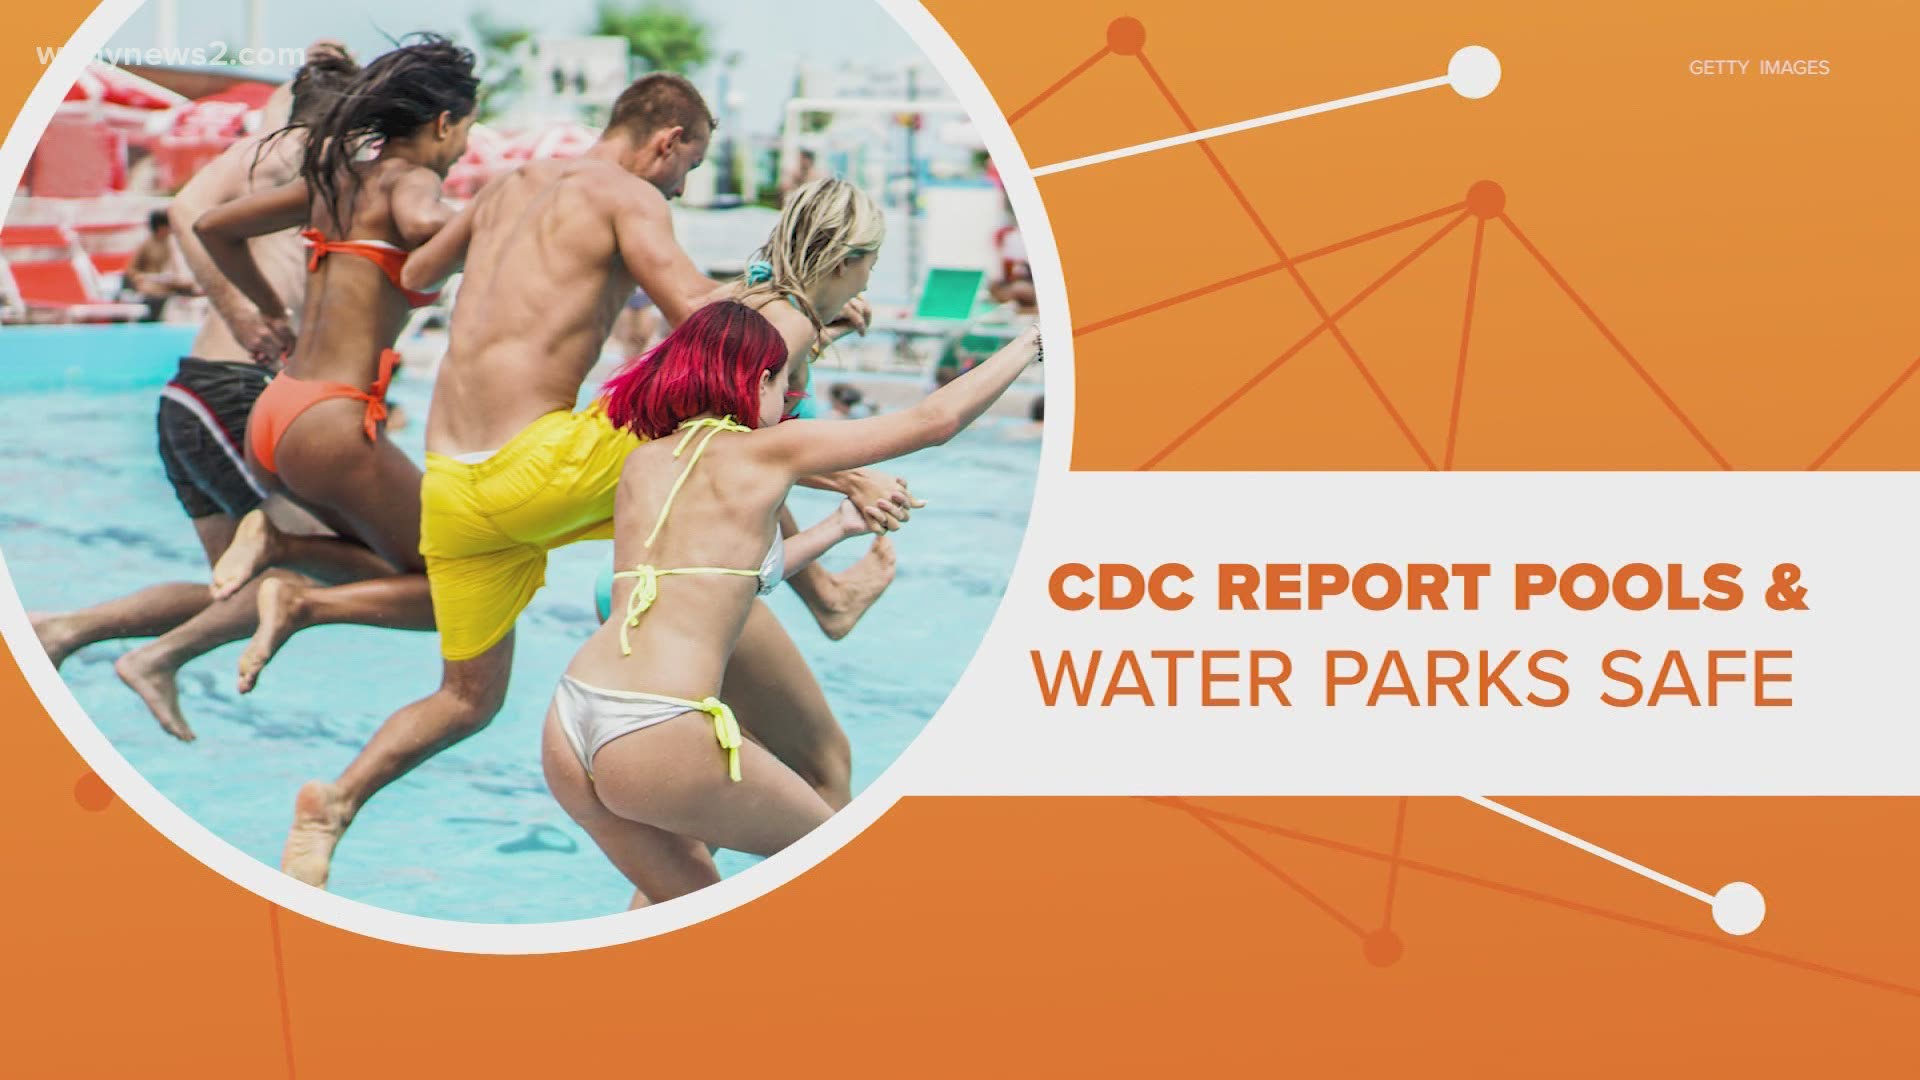 With many public pools choosing to stay closed, more people will be swimming at home, and there is a worry about it leading to more drownings.